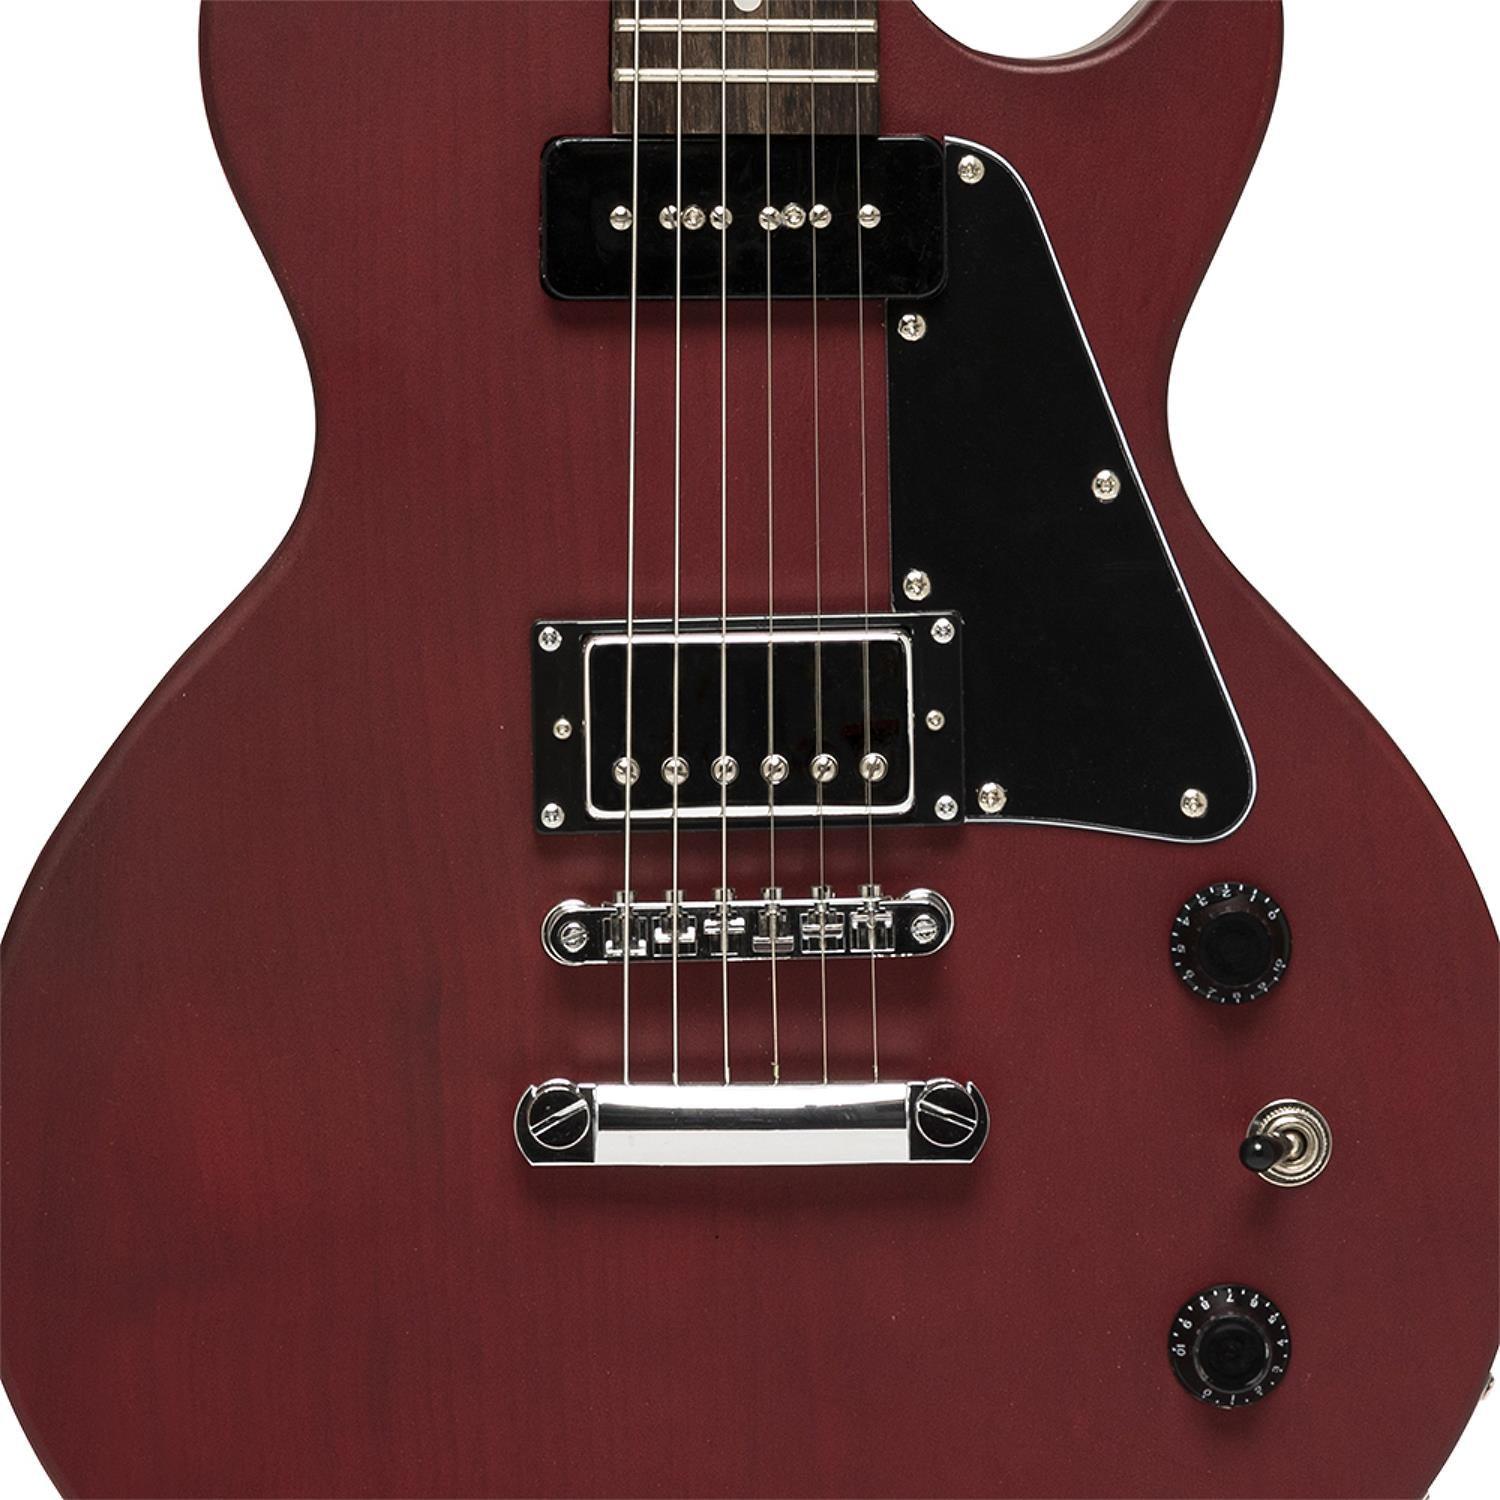 Stagg SSEL-HB90 CHERRY Standard Mahogany Electric Guitar - DY Pro Audio